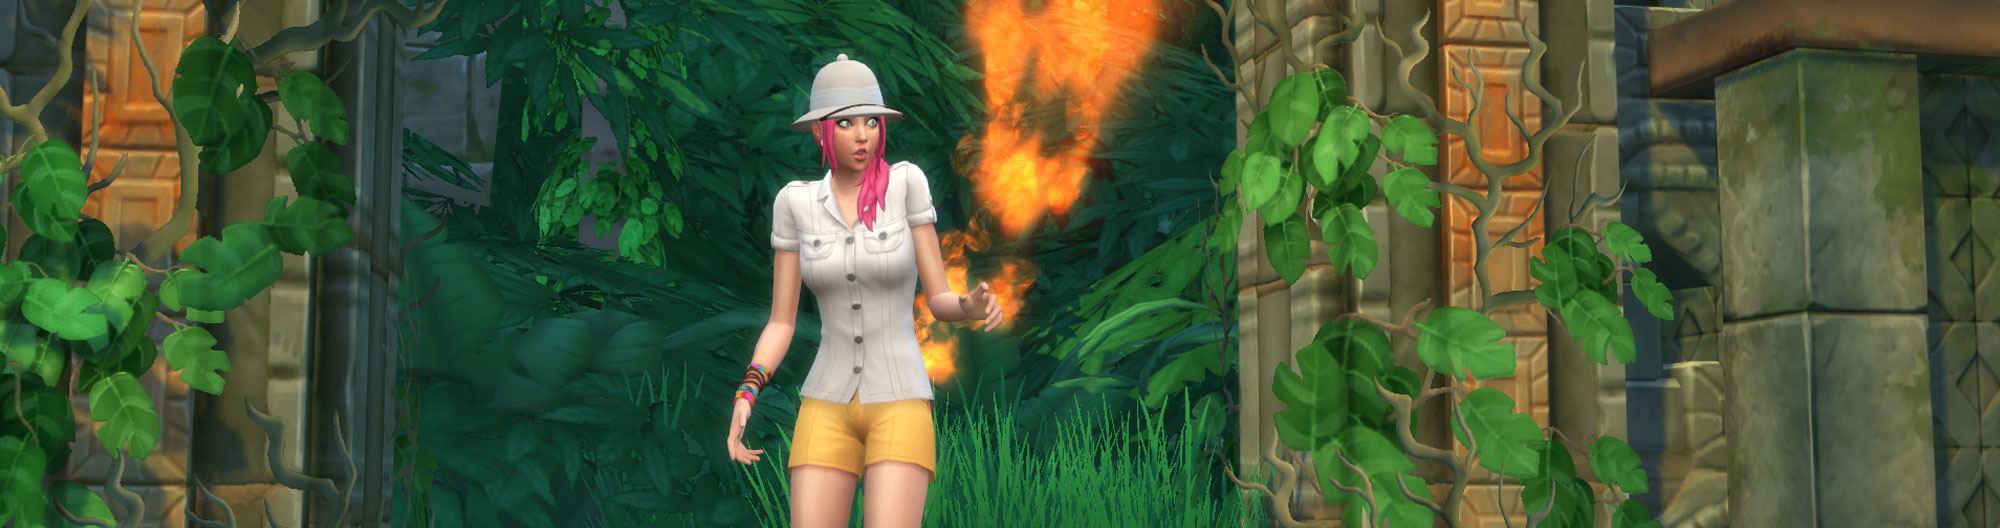 the sims 4 jungle adventure review